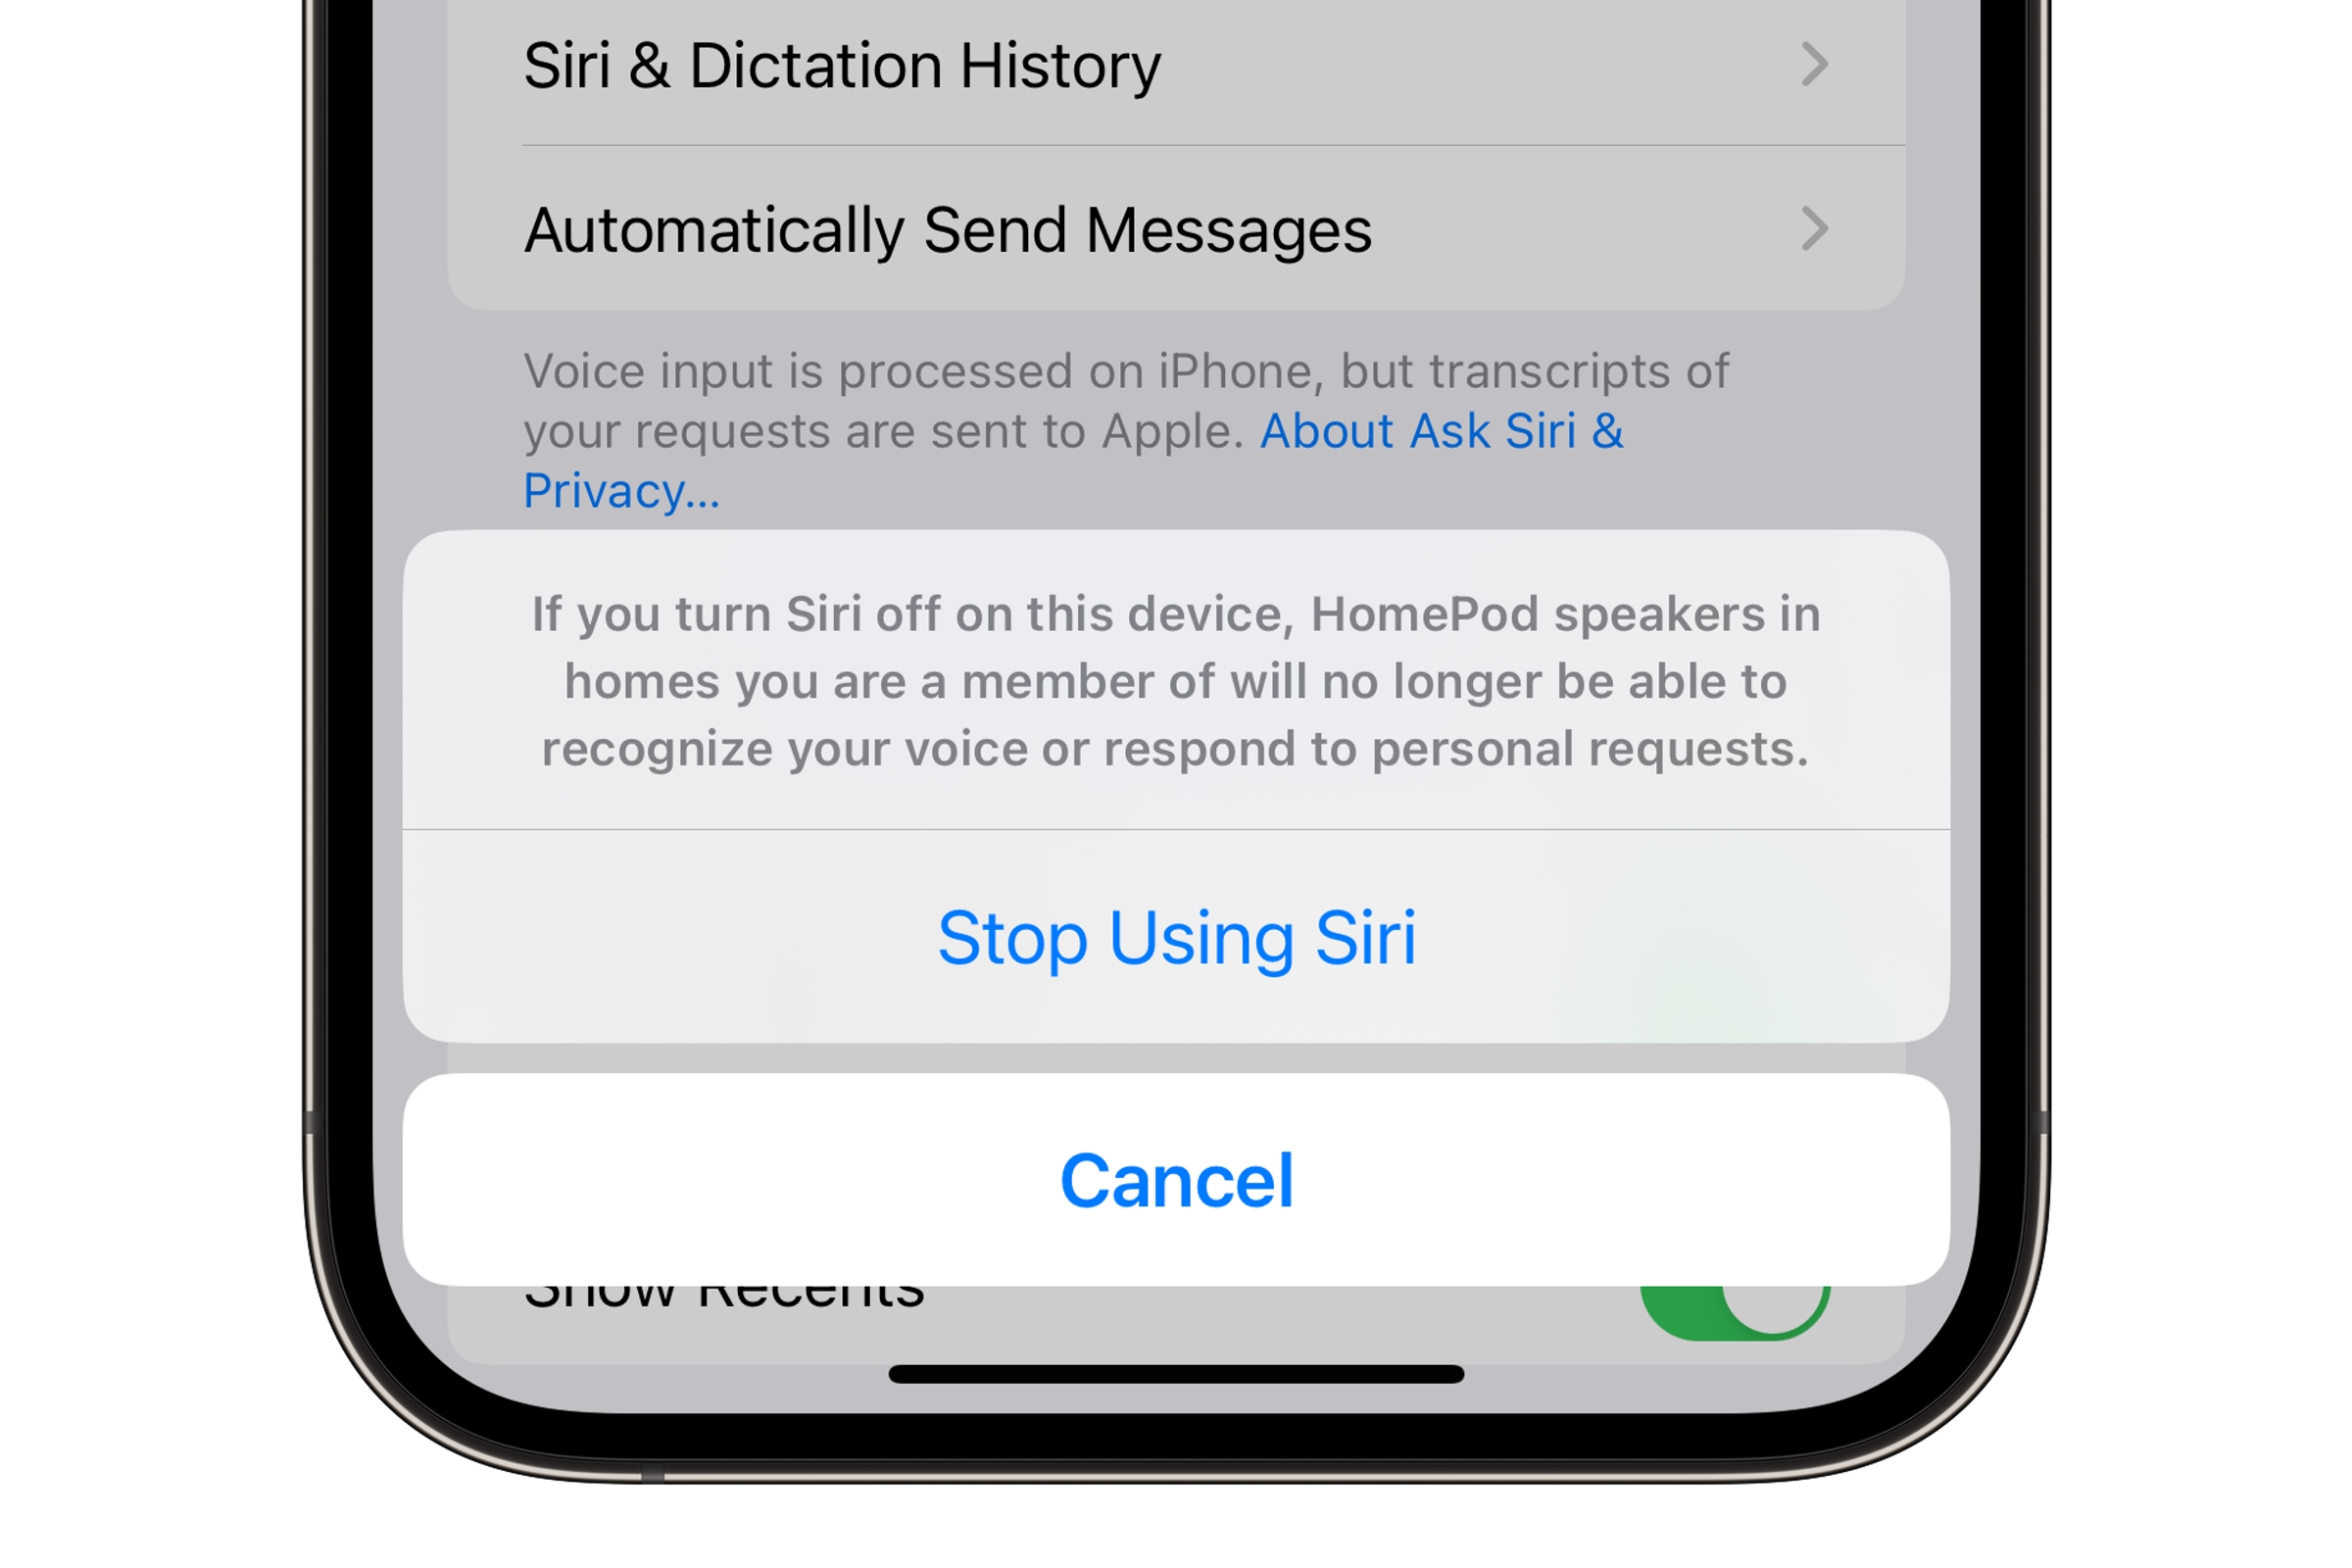 iPhone Stop Using Siri Confirmation for HomePod users.